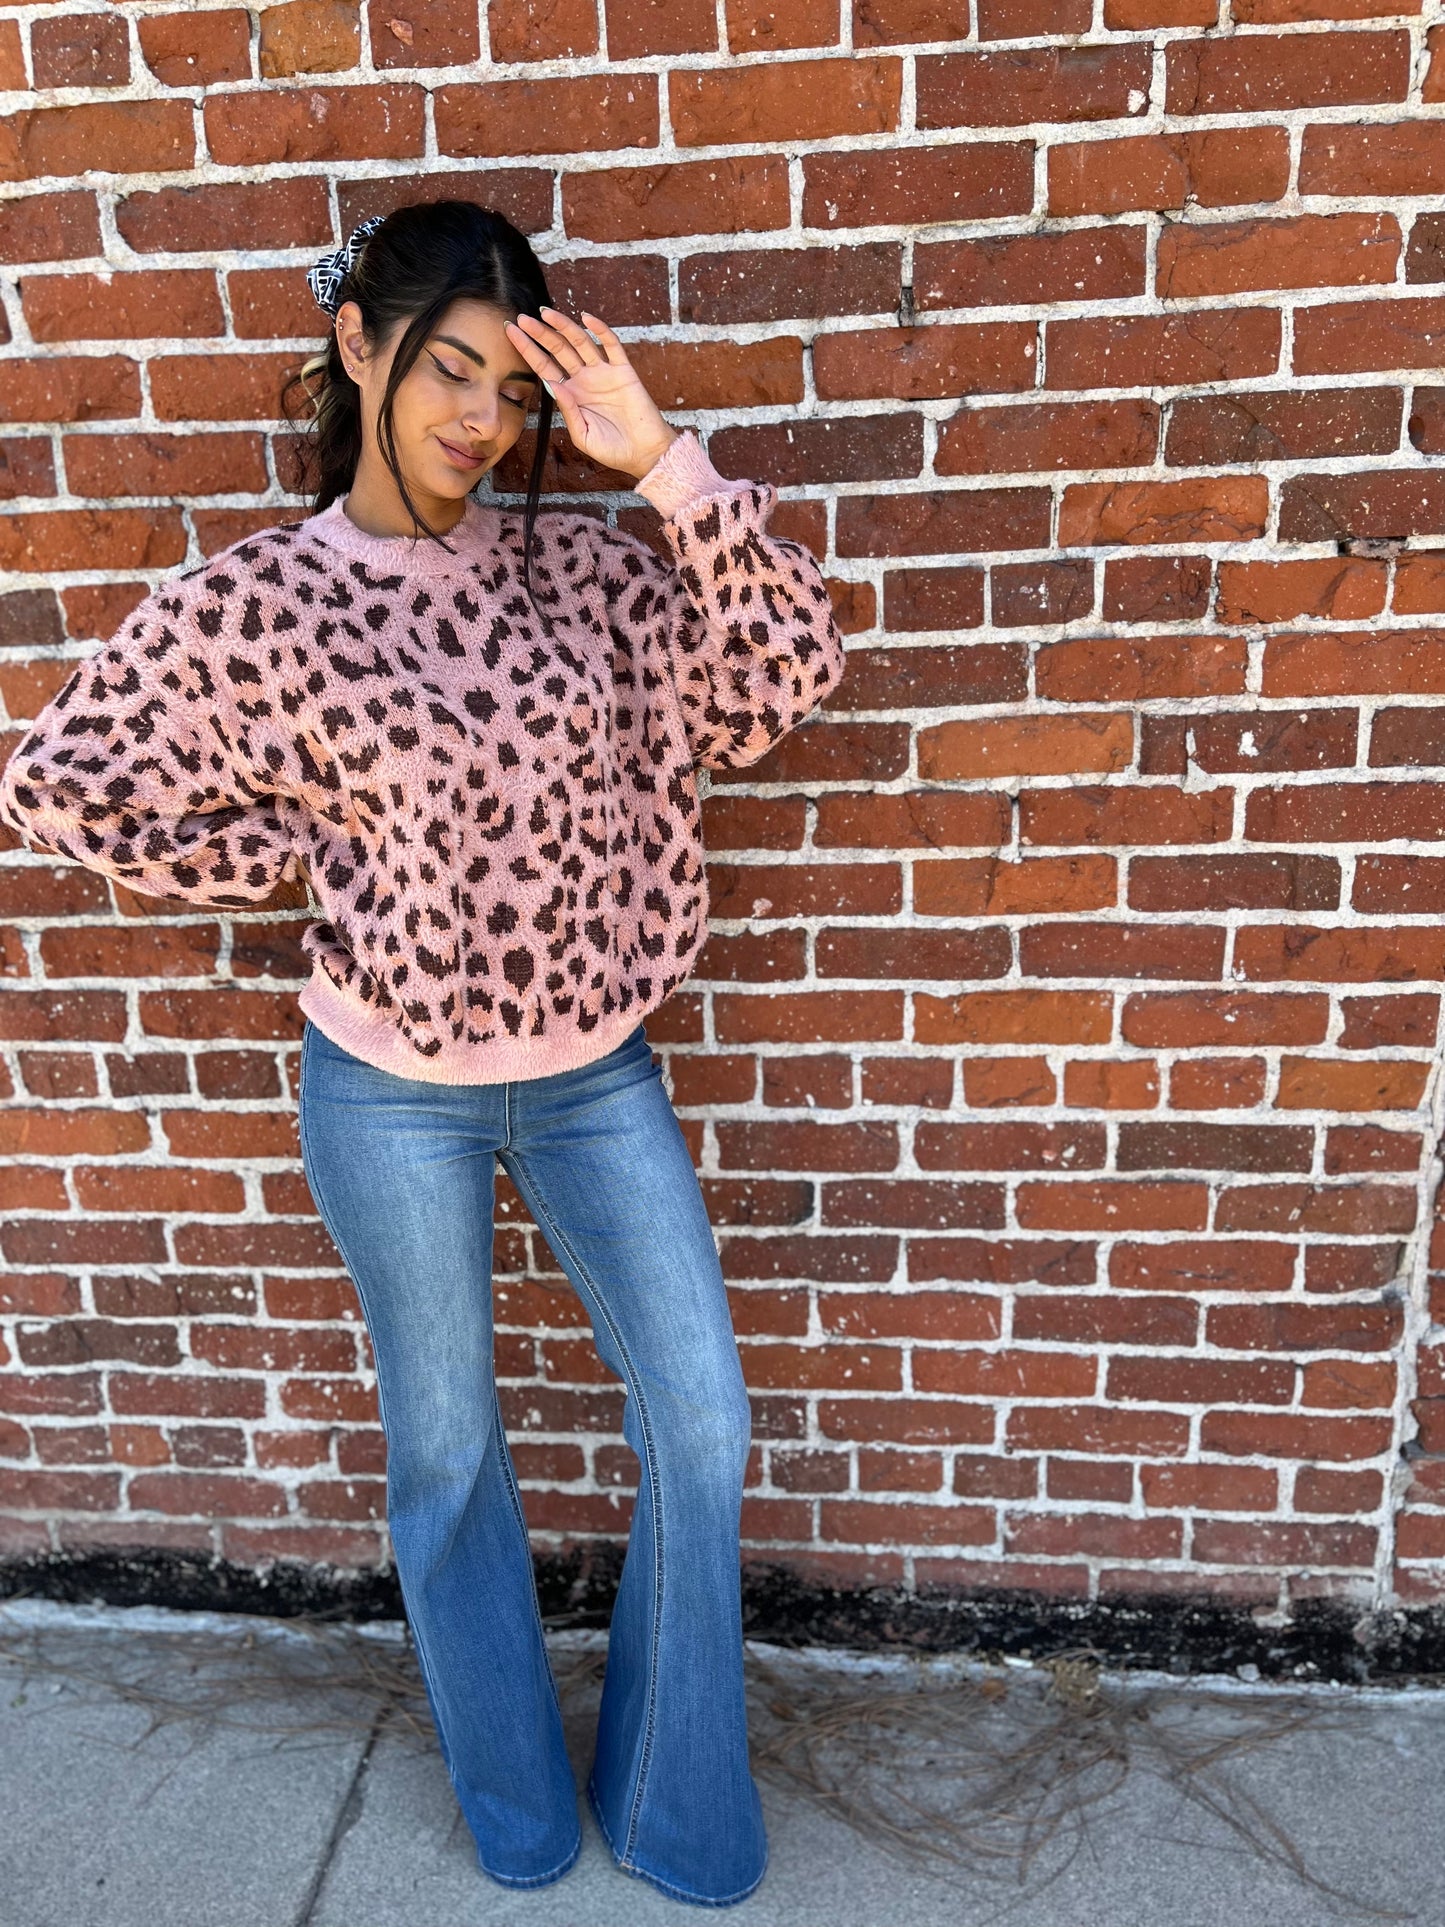 trendy girl wearing a leopard sweater with bell bottoms posed against a brick wall